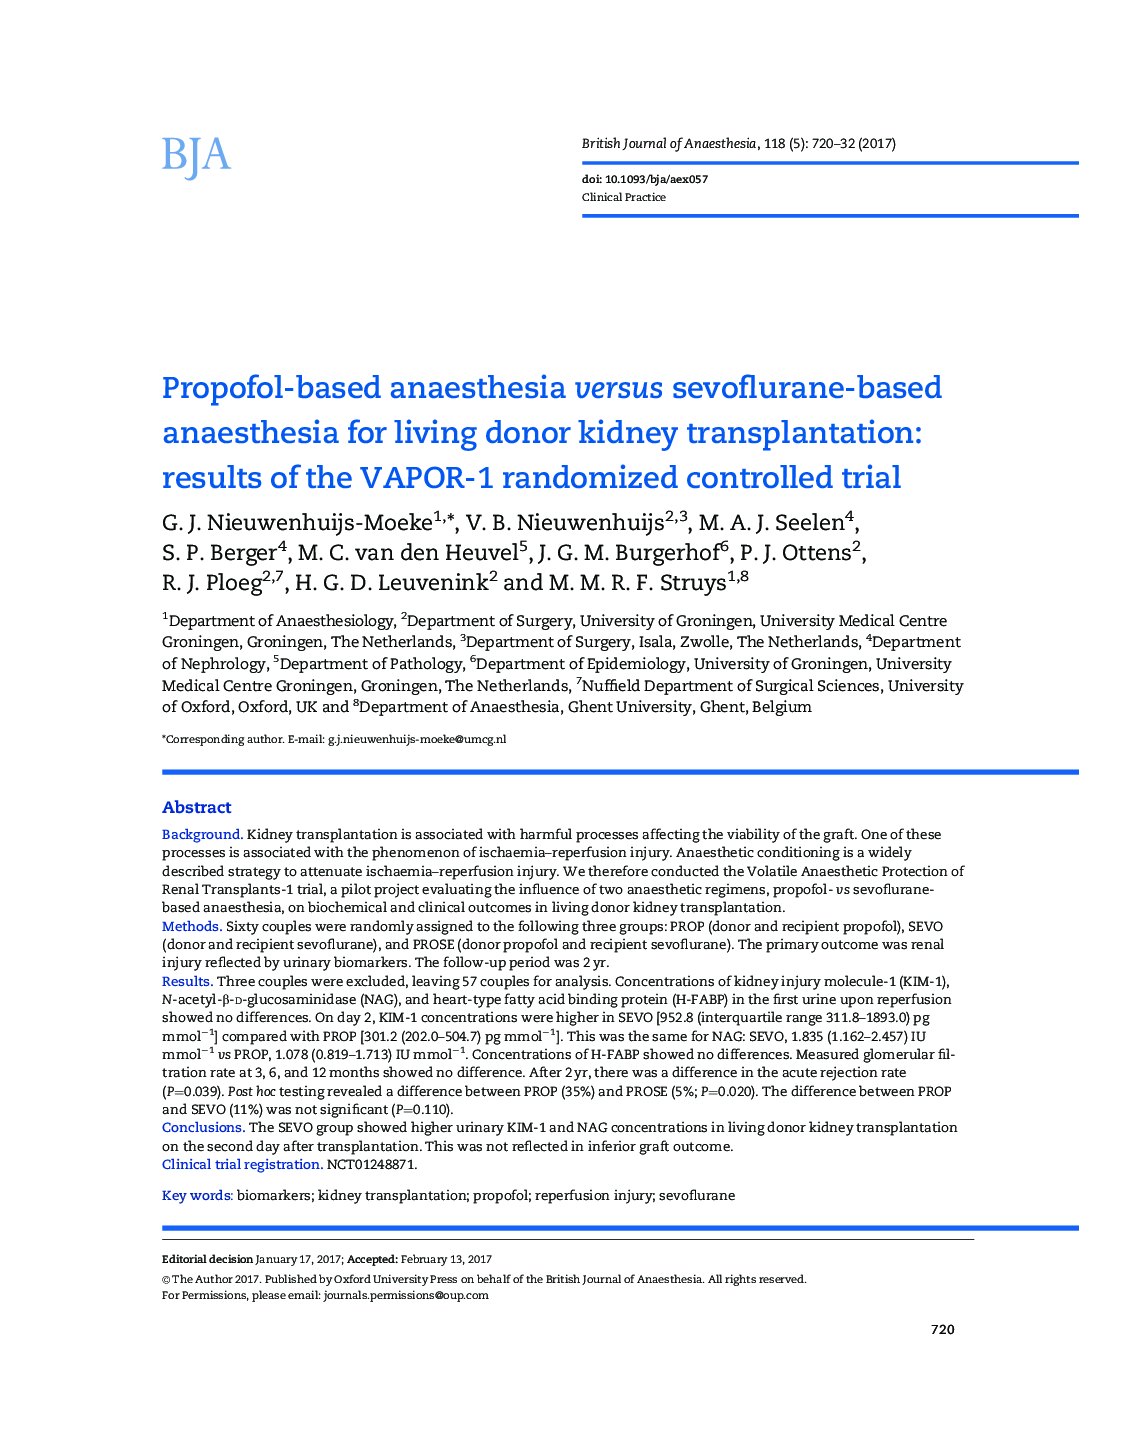 Propofol-based anaesthesia versus sevoflurane-based anaesthesia for living donor kidney transplantation: results of the VAPOR-1 randomized controlled trial